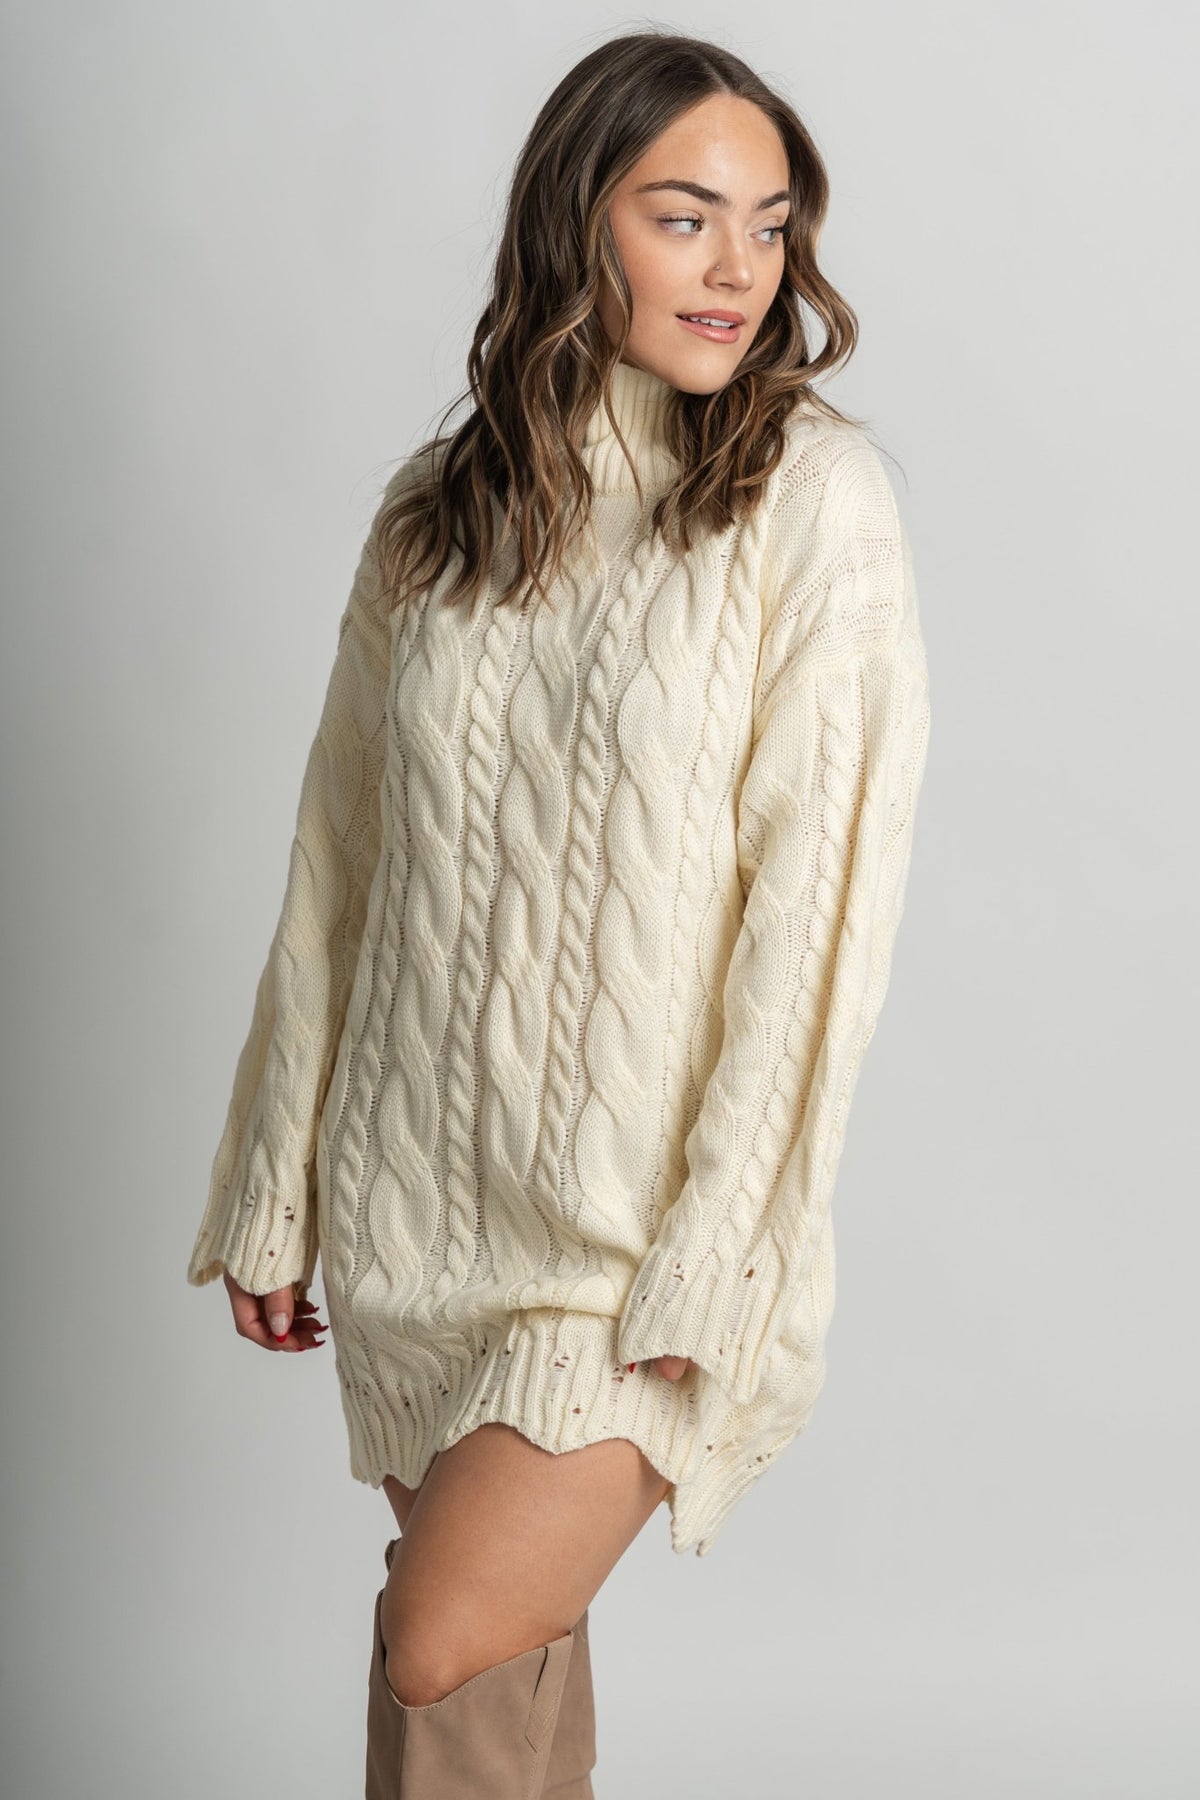 Cable knit sweater dress cream – Boutique Sweaters | Fashionable Sweaters at Lush Fashion Lounge Boutique in Oklahoma City